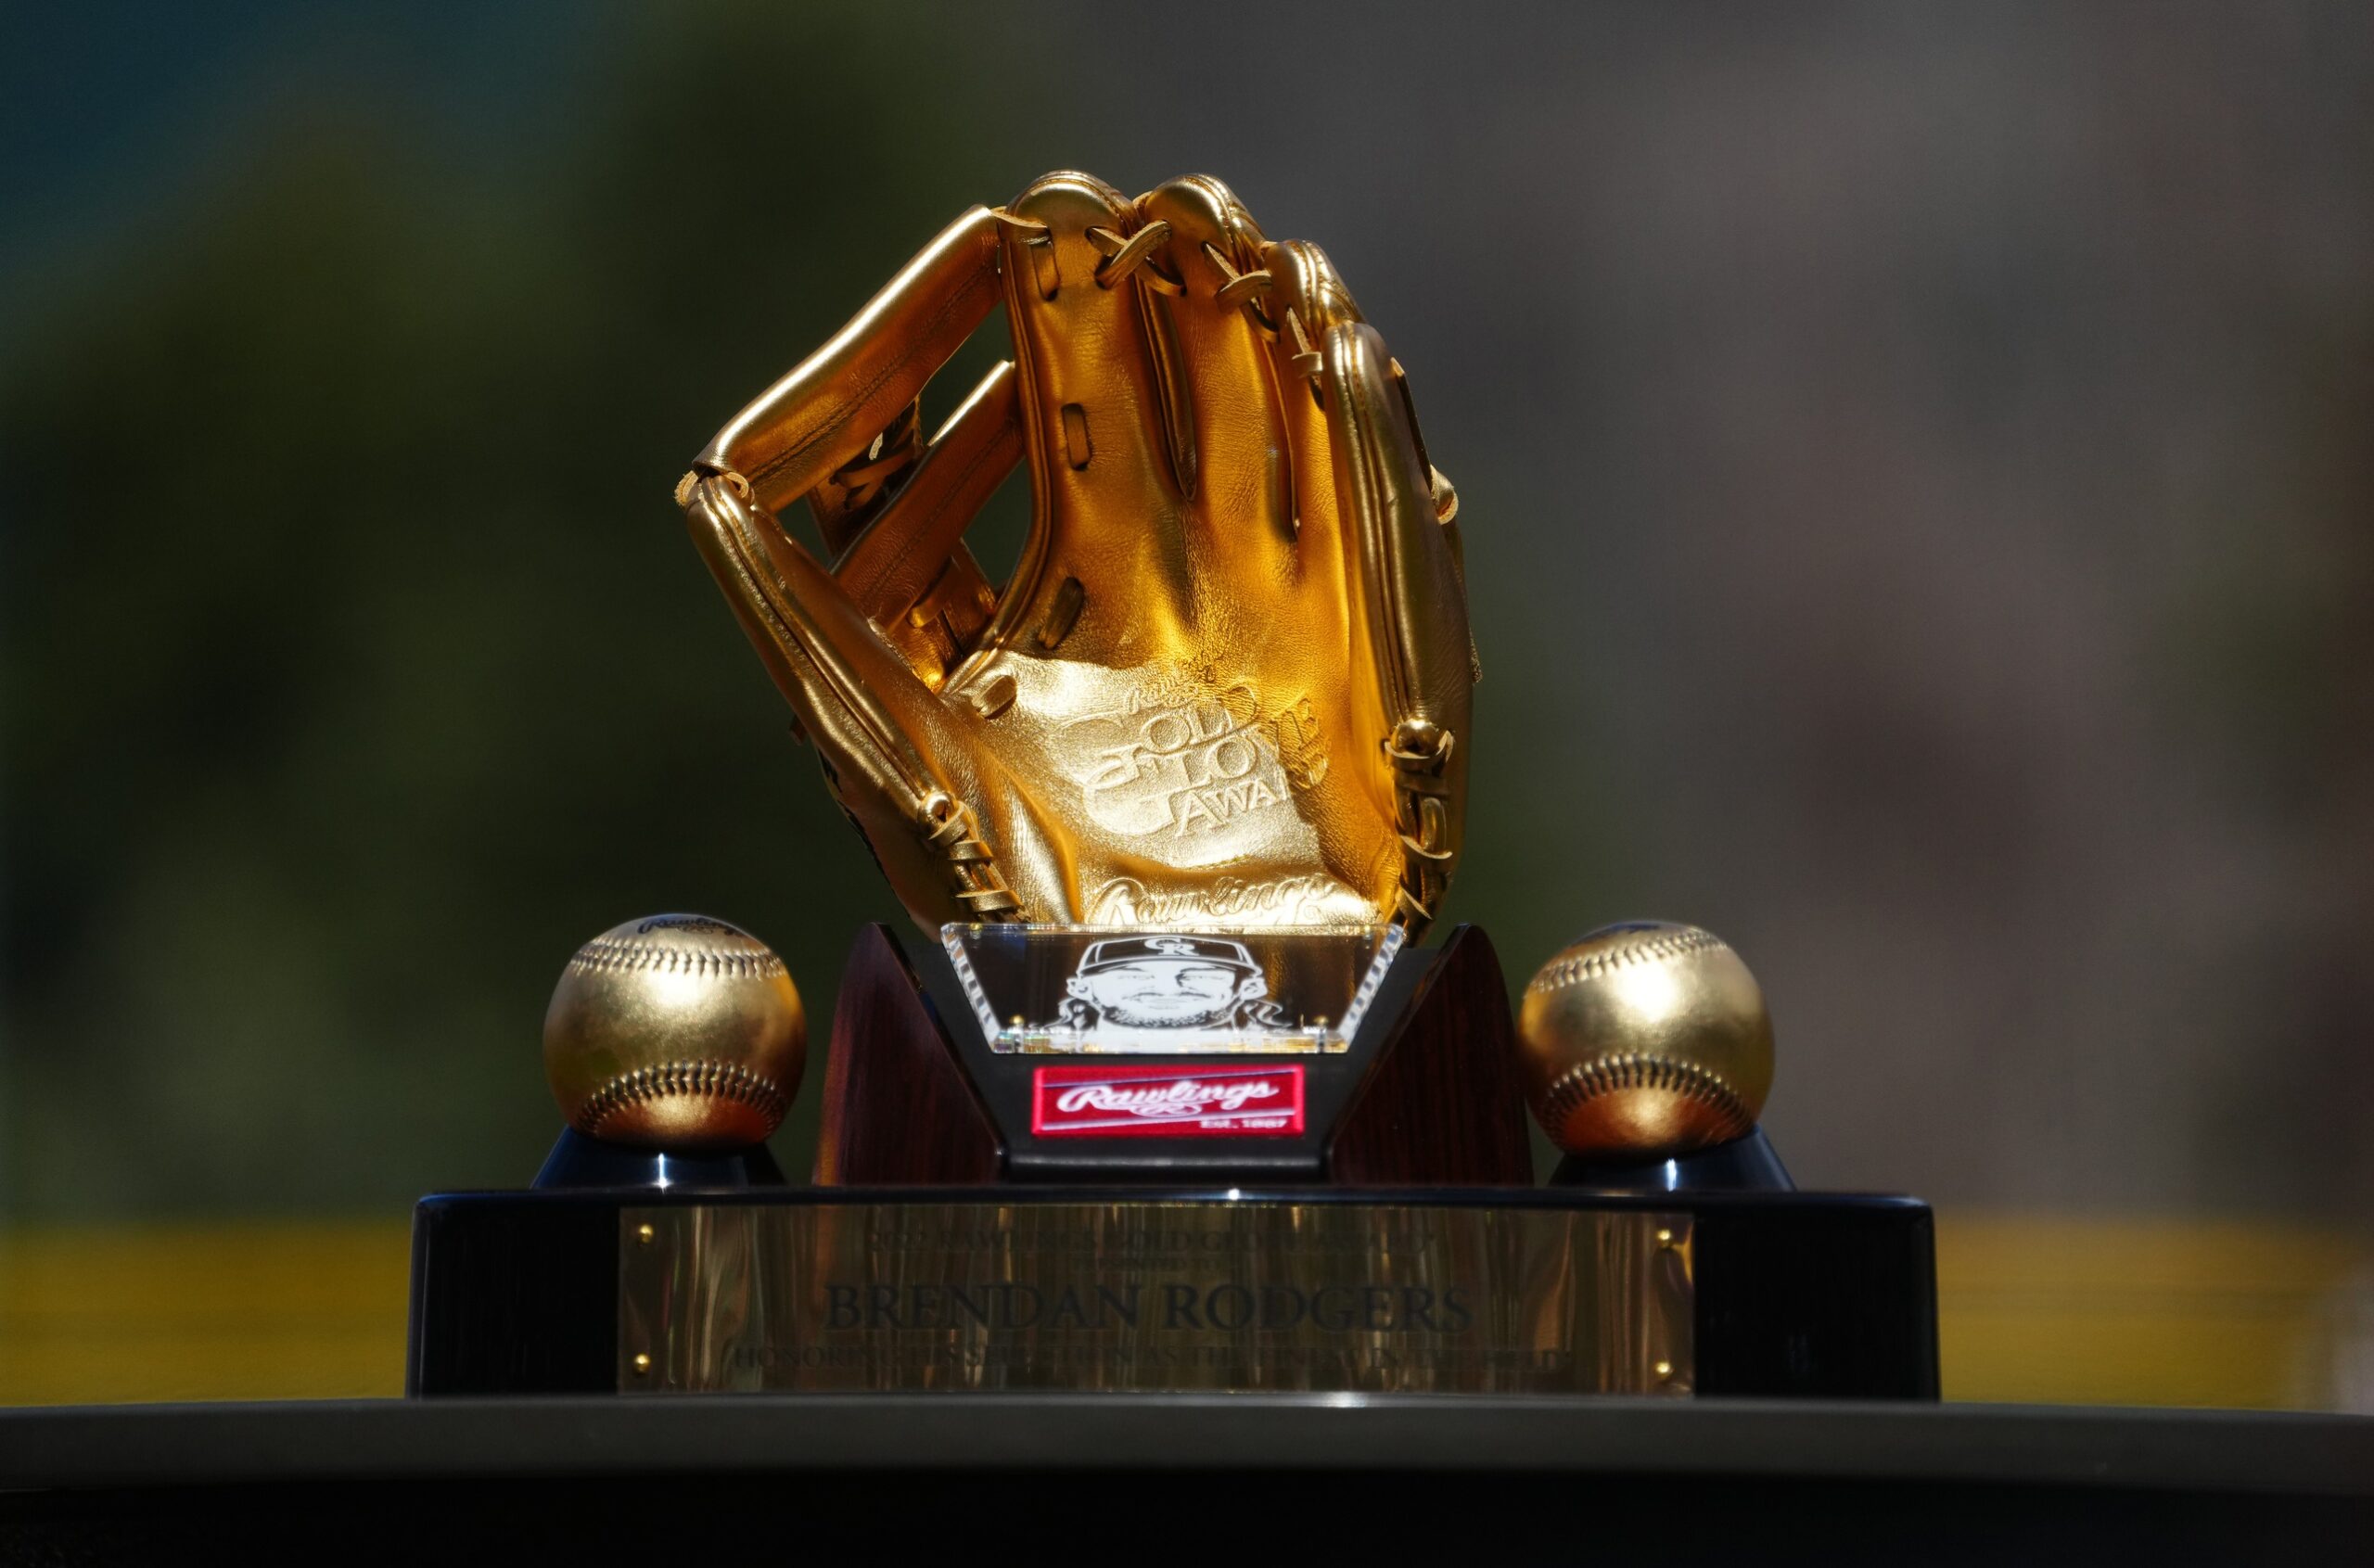 SNY Mets: Francisco Lindor has been named a 2023 NL Gold Glove